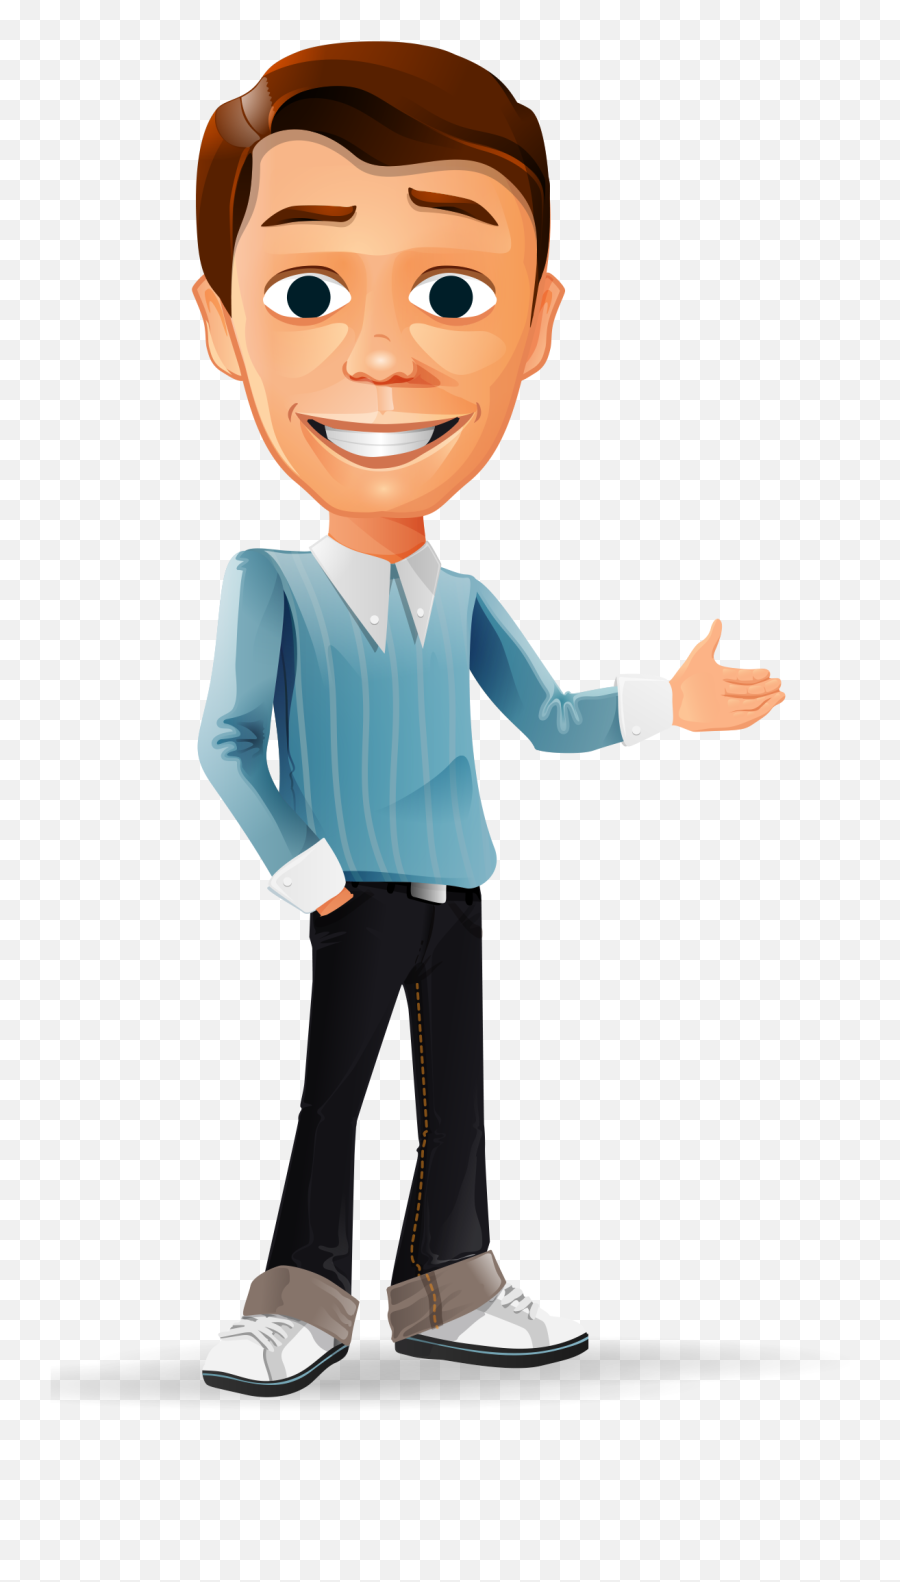 Download Jpg Free Library Welcome - Png Animation Emoji,Businessman Png